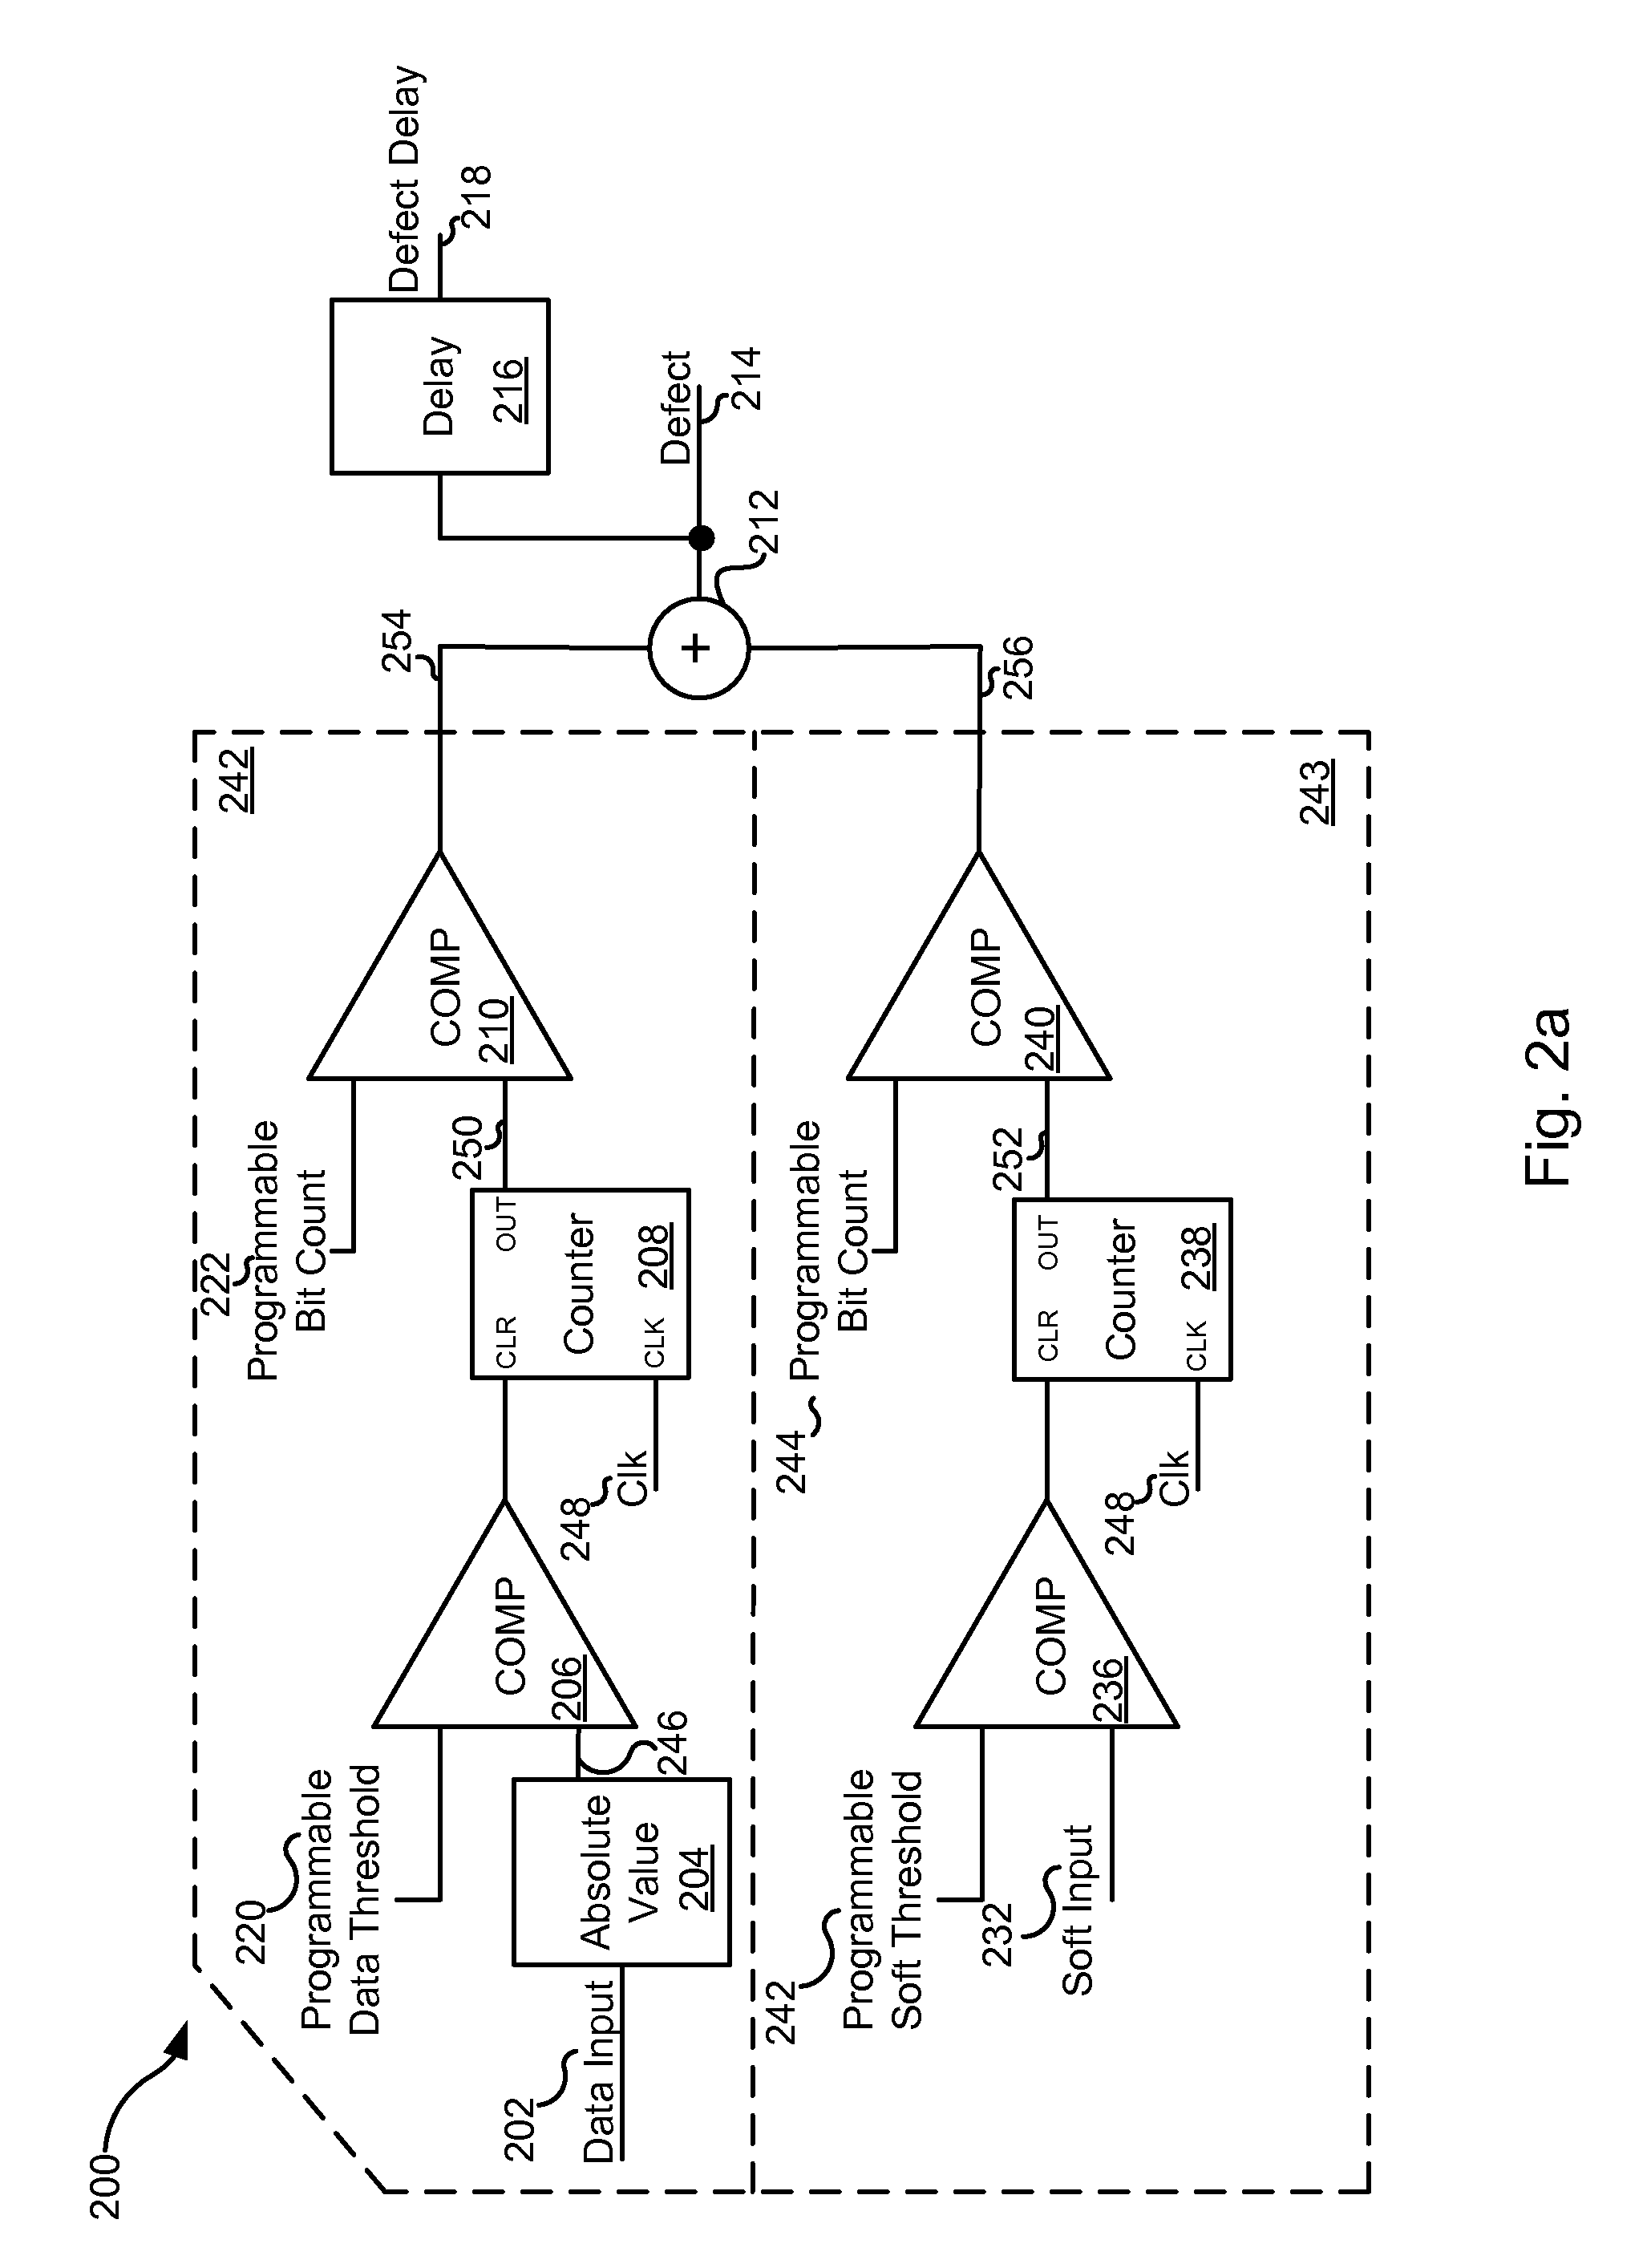 Systems and Methods for Media Defect Detection